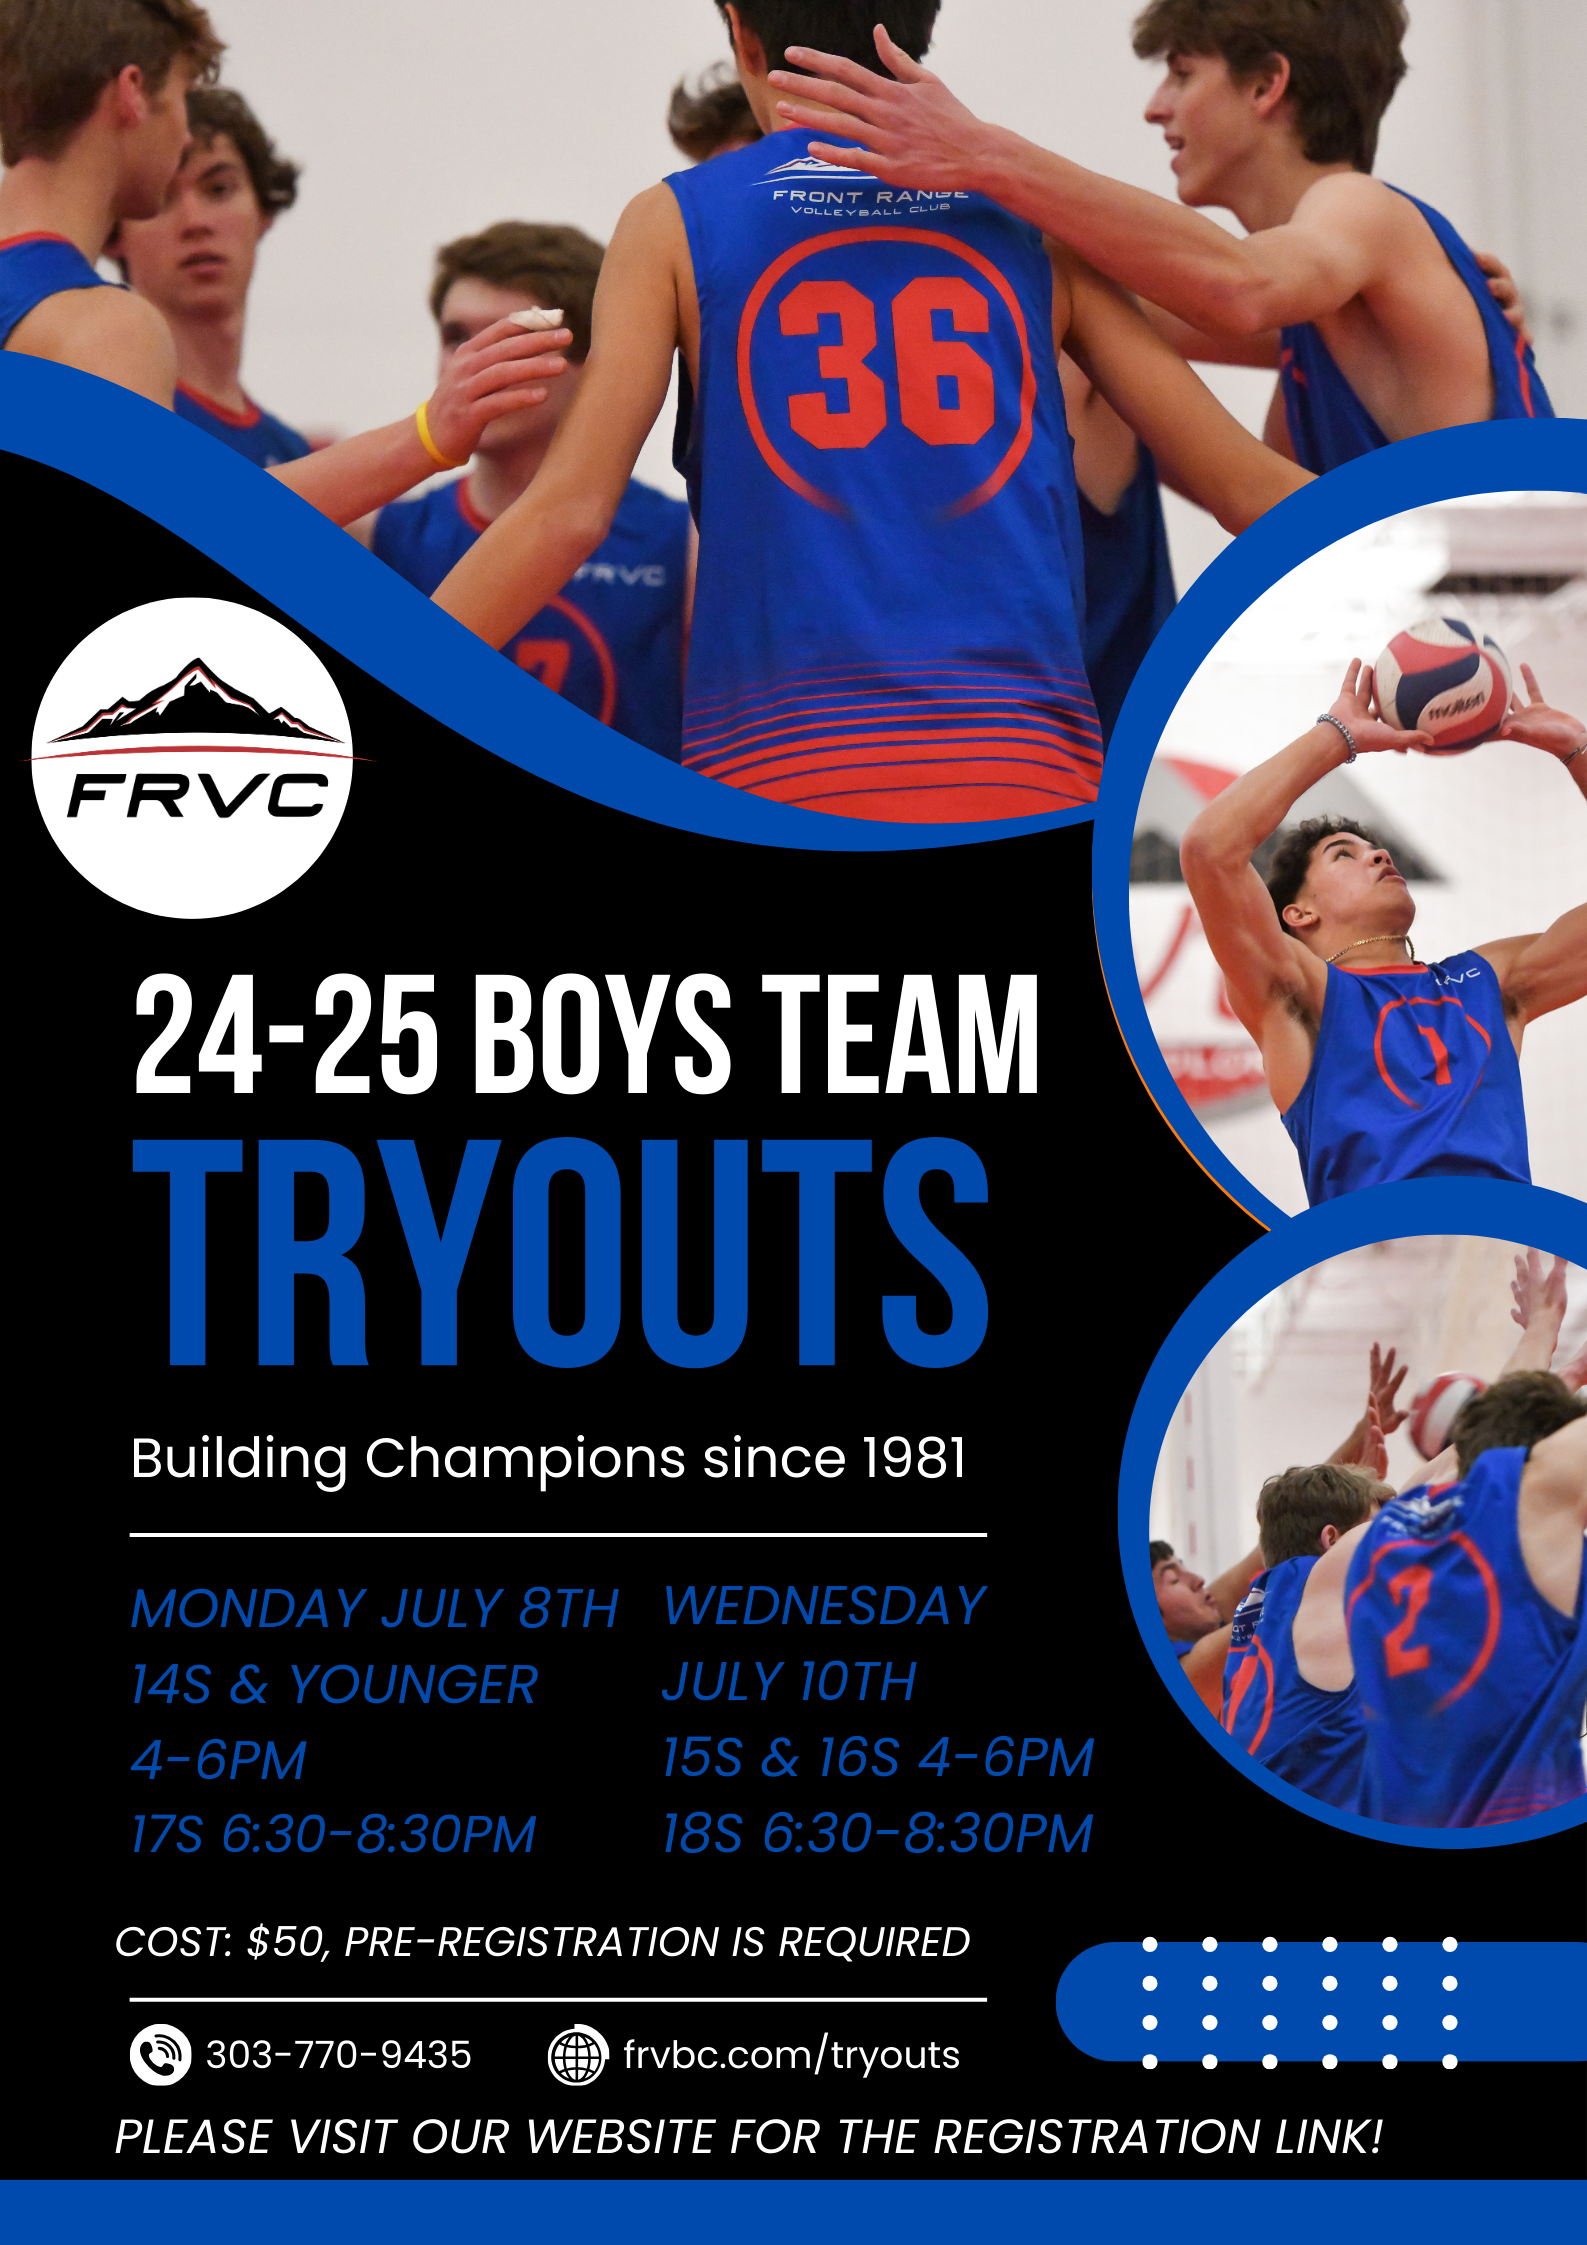 24-25 Boys Team Tryouts